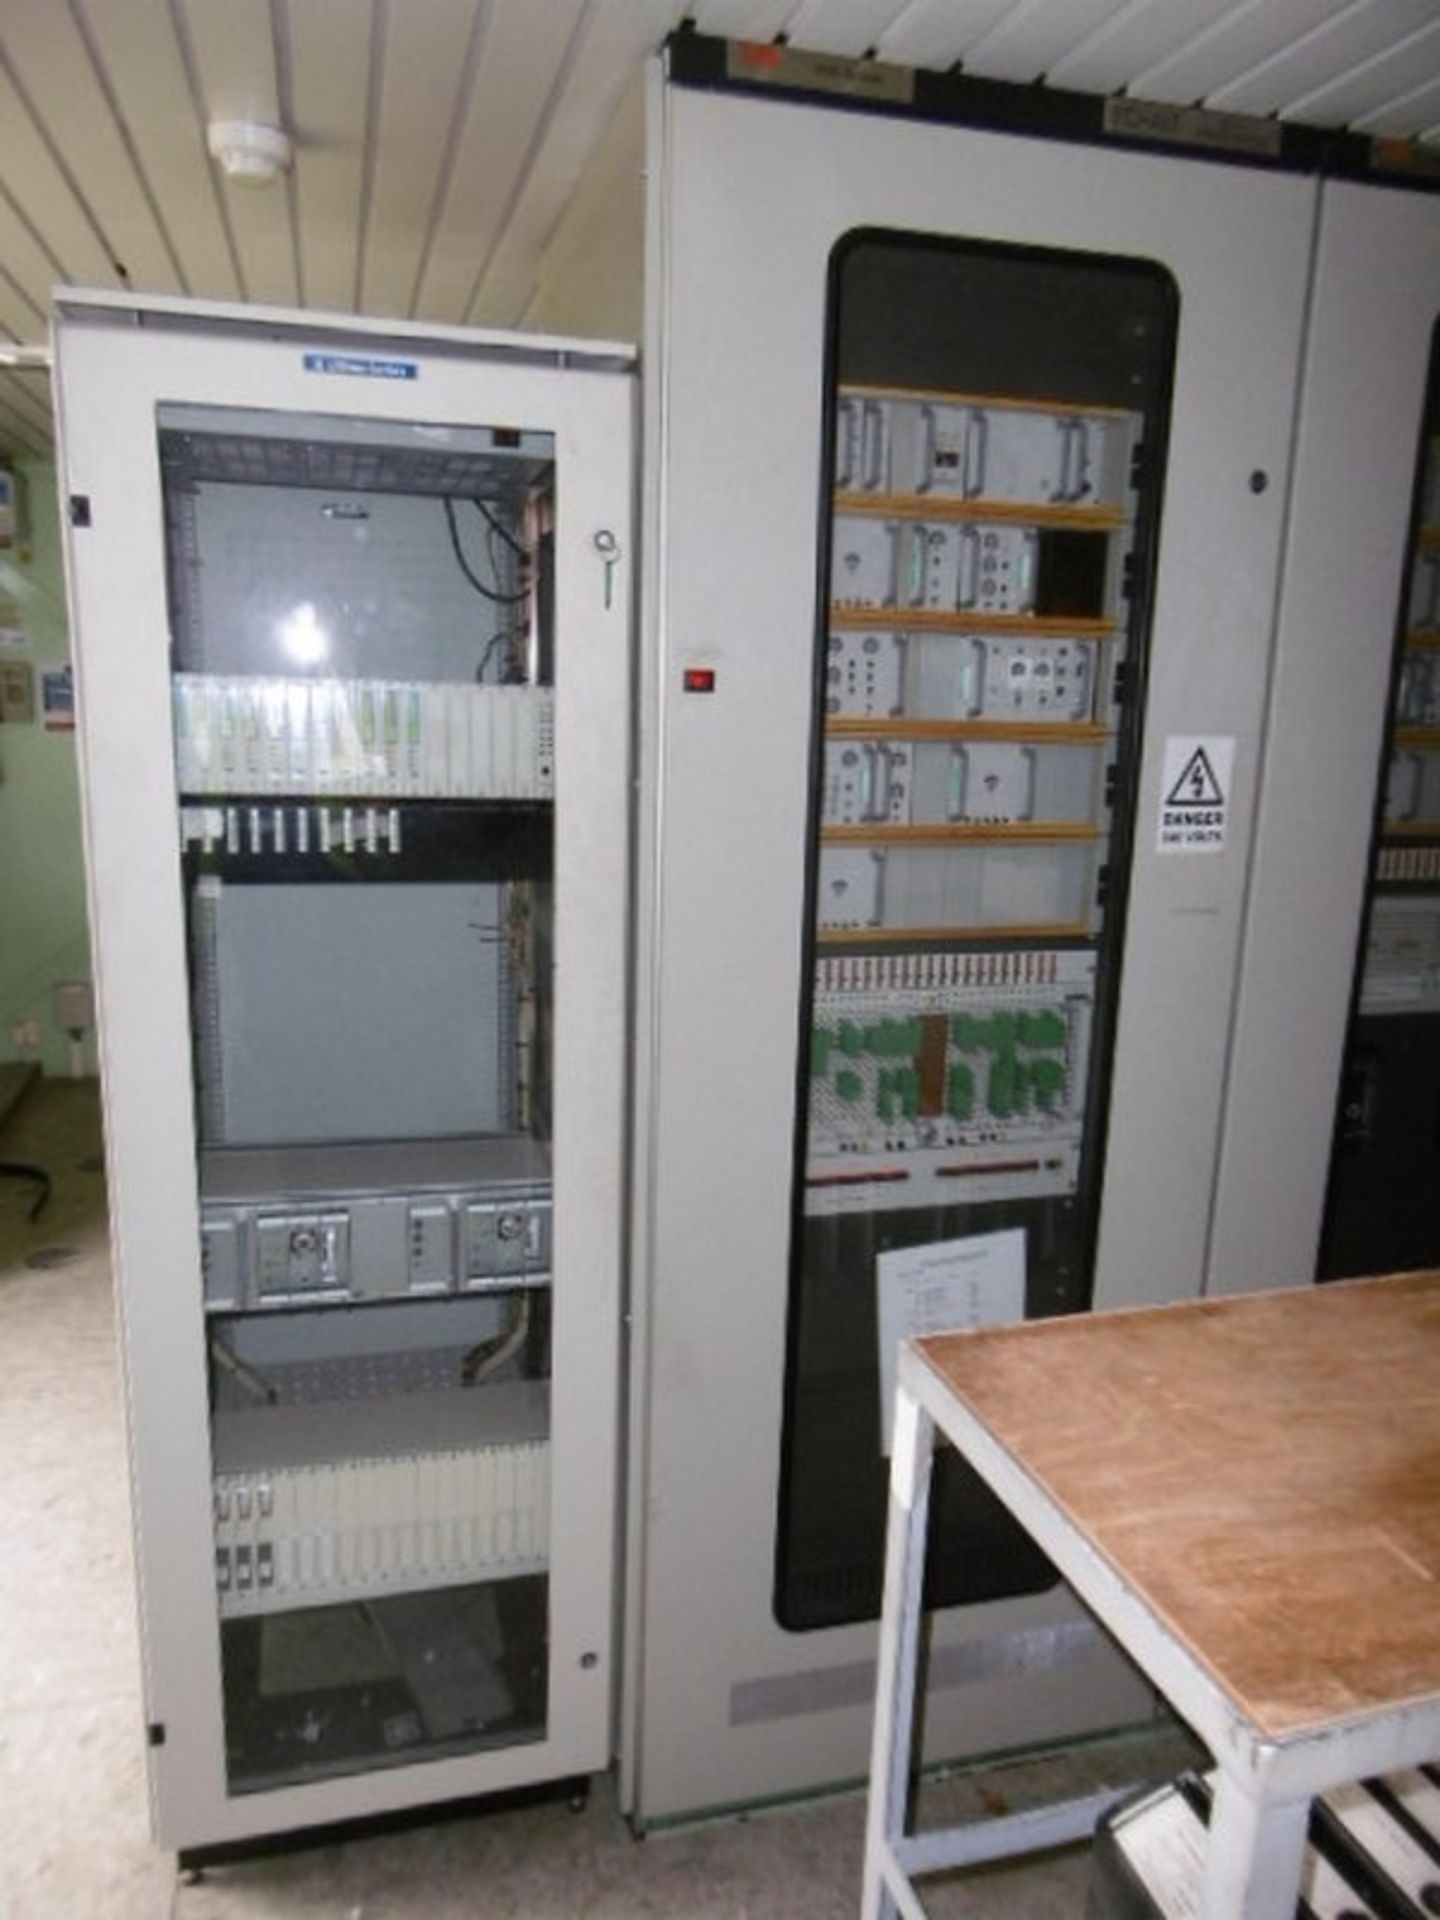 Large Qty Switchgear - From Gas Turbine 1 Control Module Building - Image 10 of 33